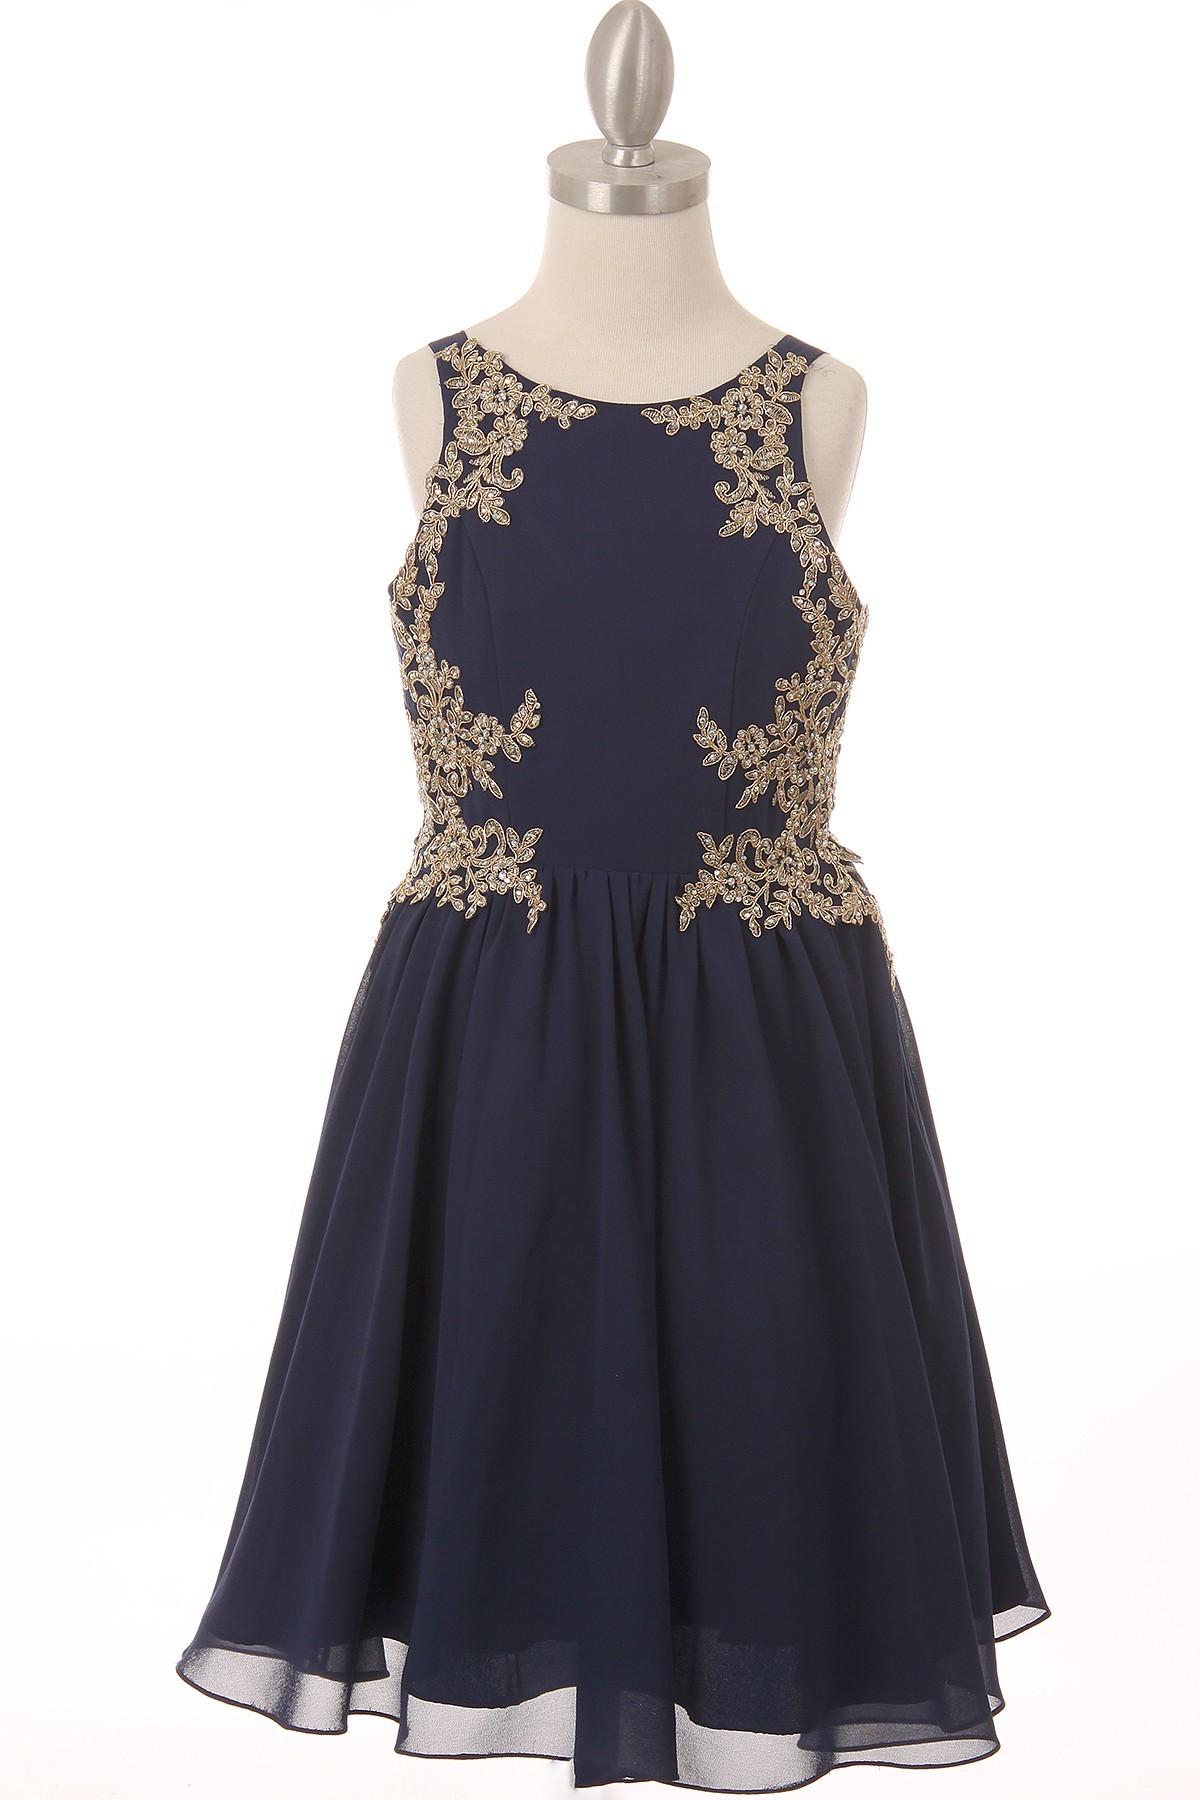 girls navy dress with golden lace